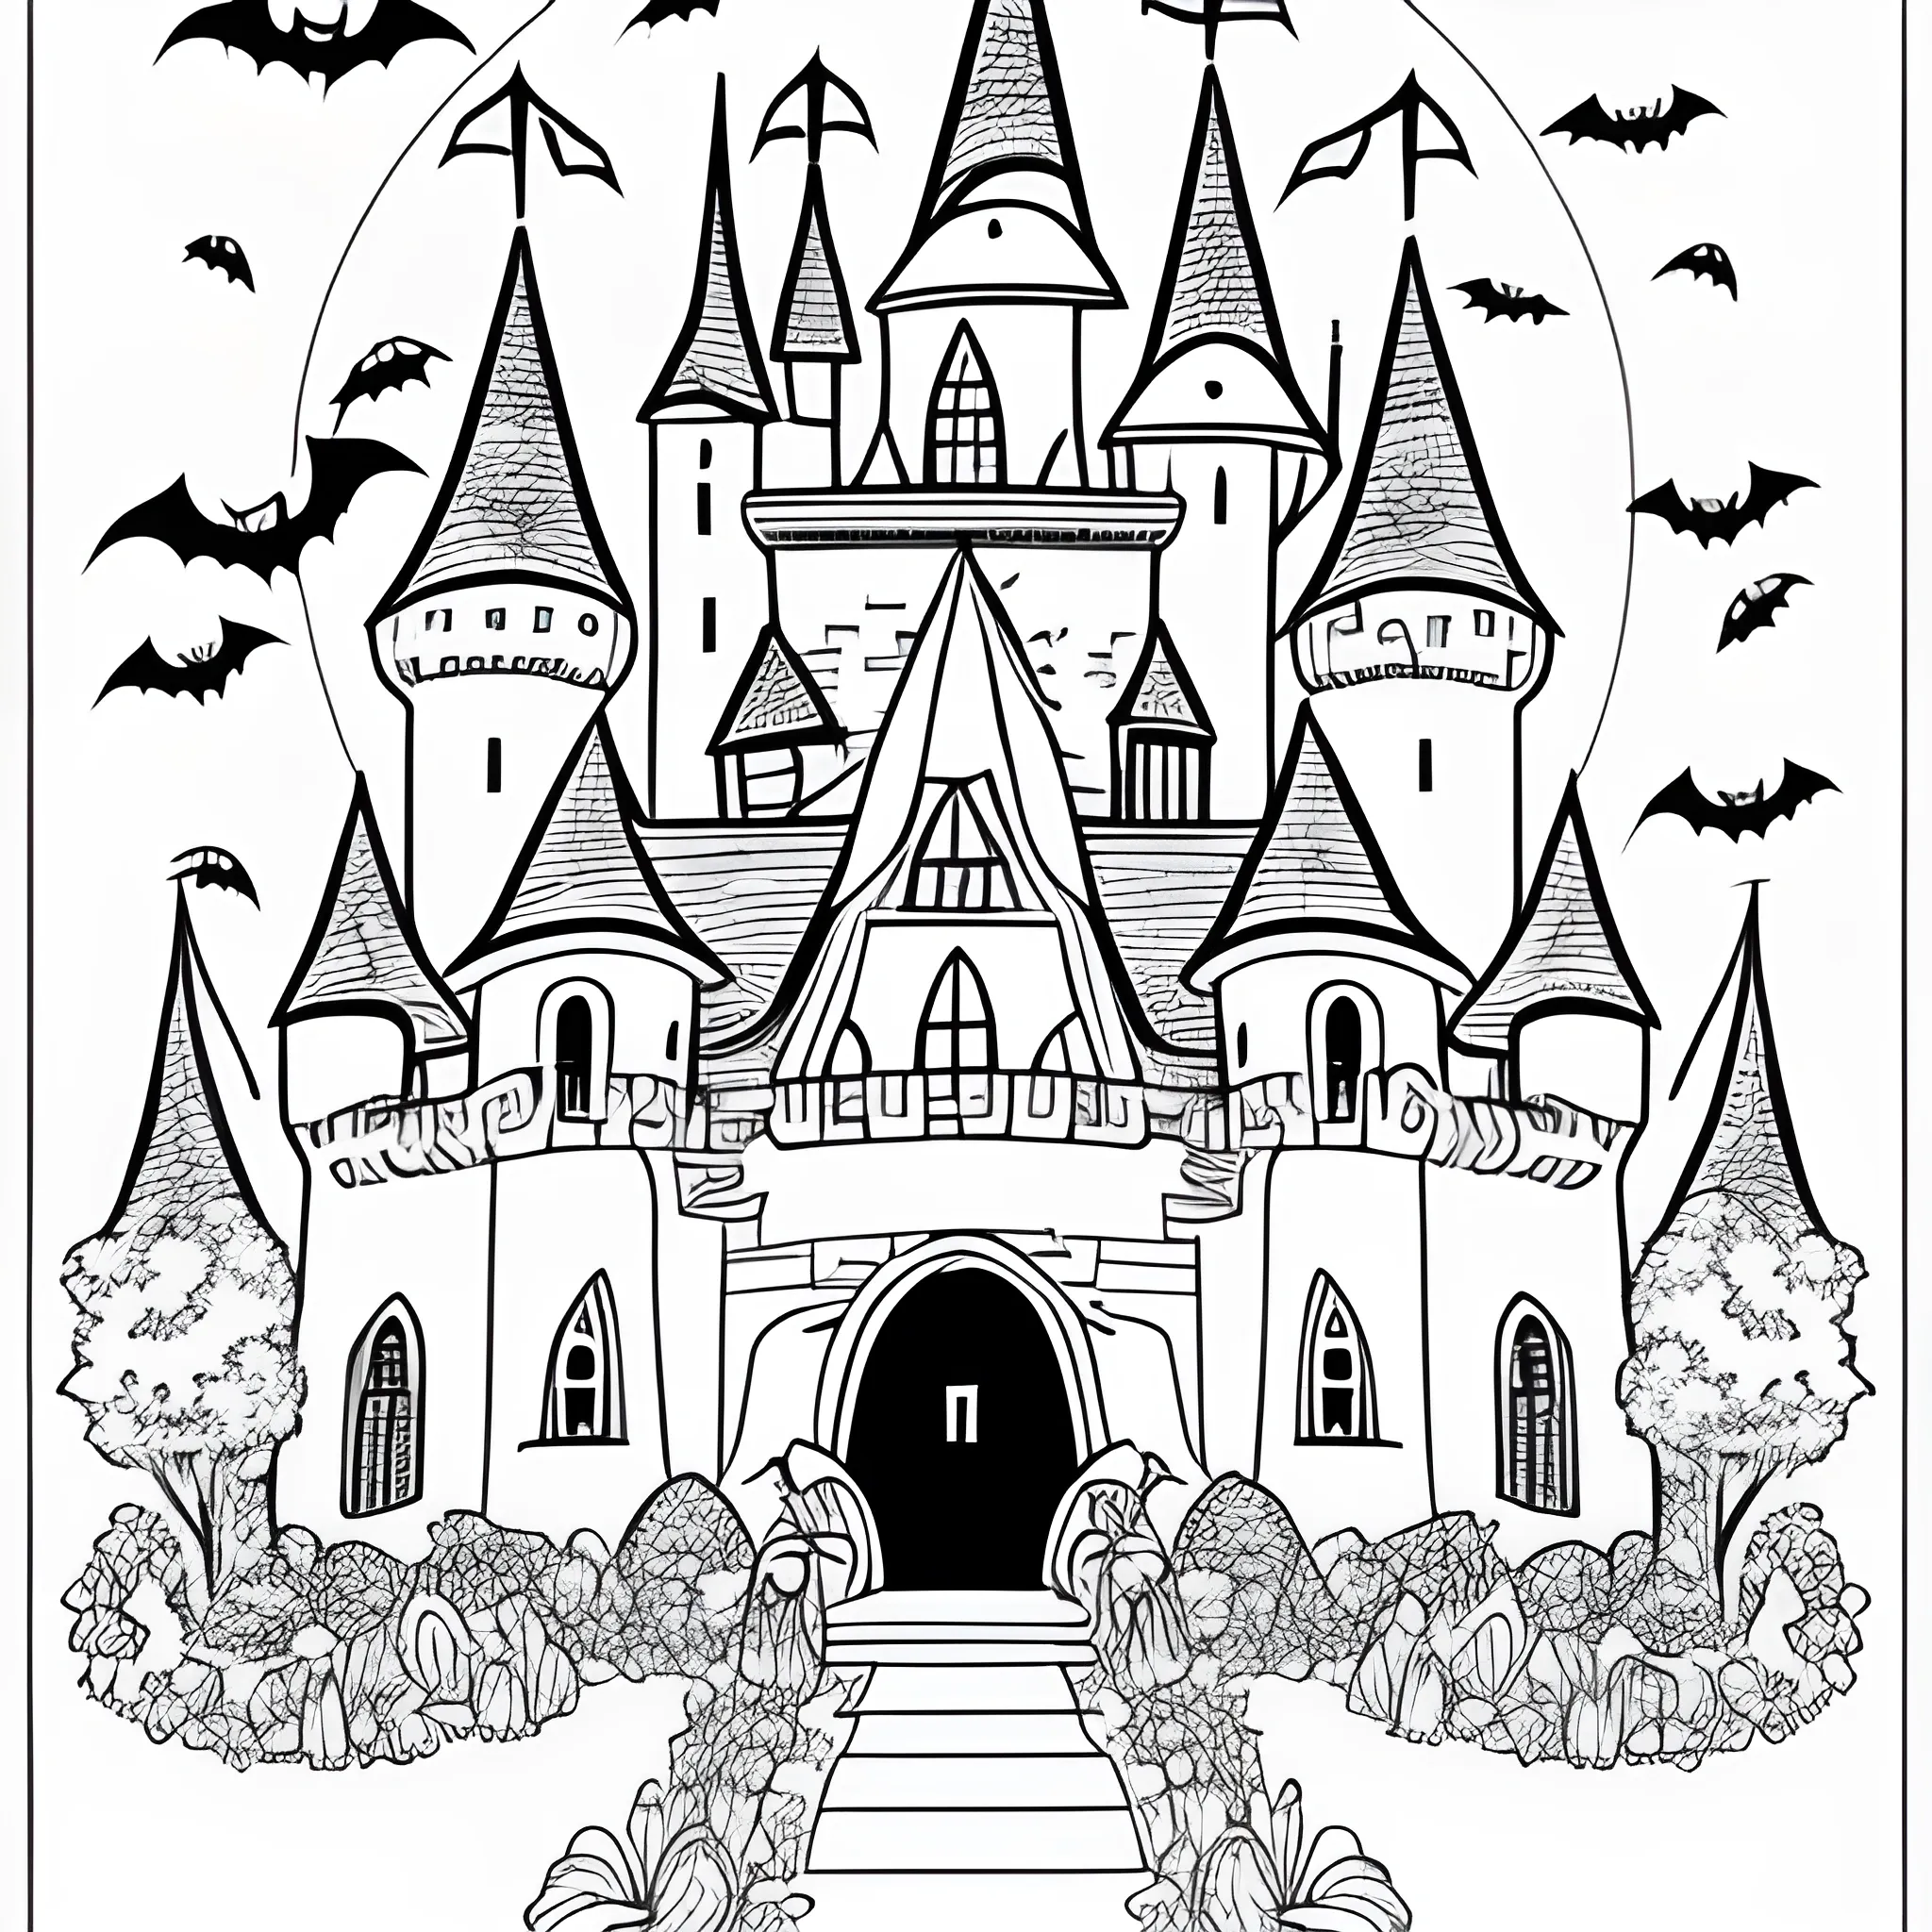 coloring book page, halloween, witch, castle